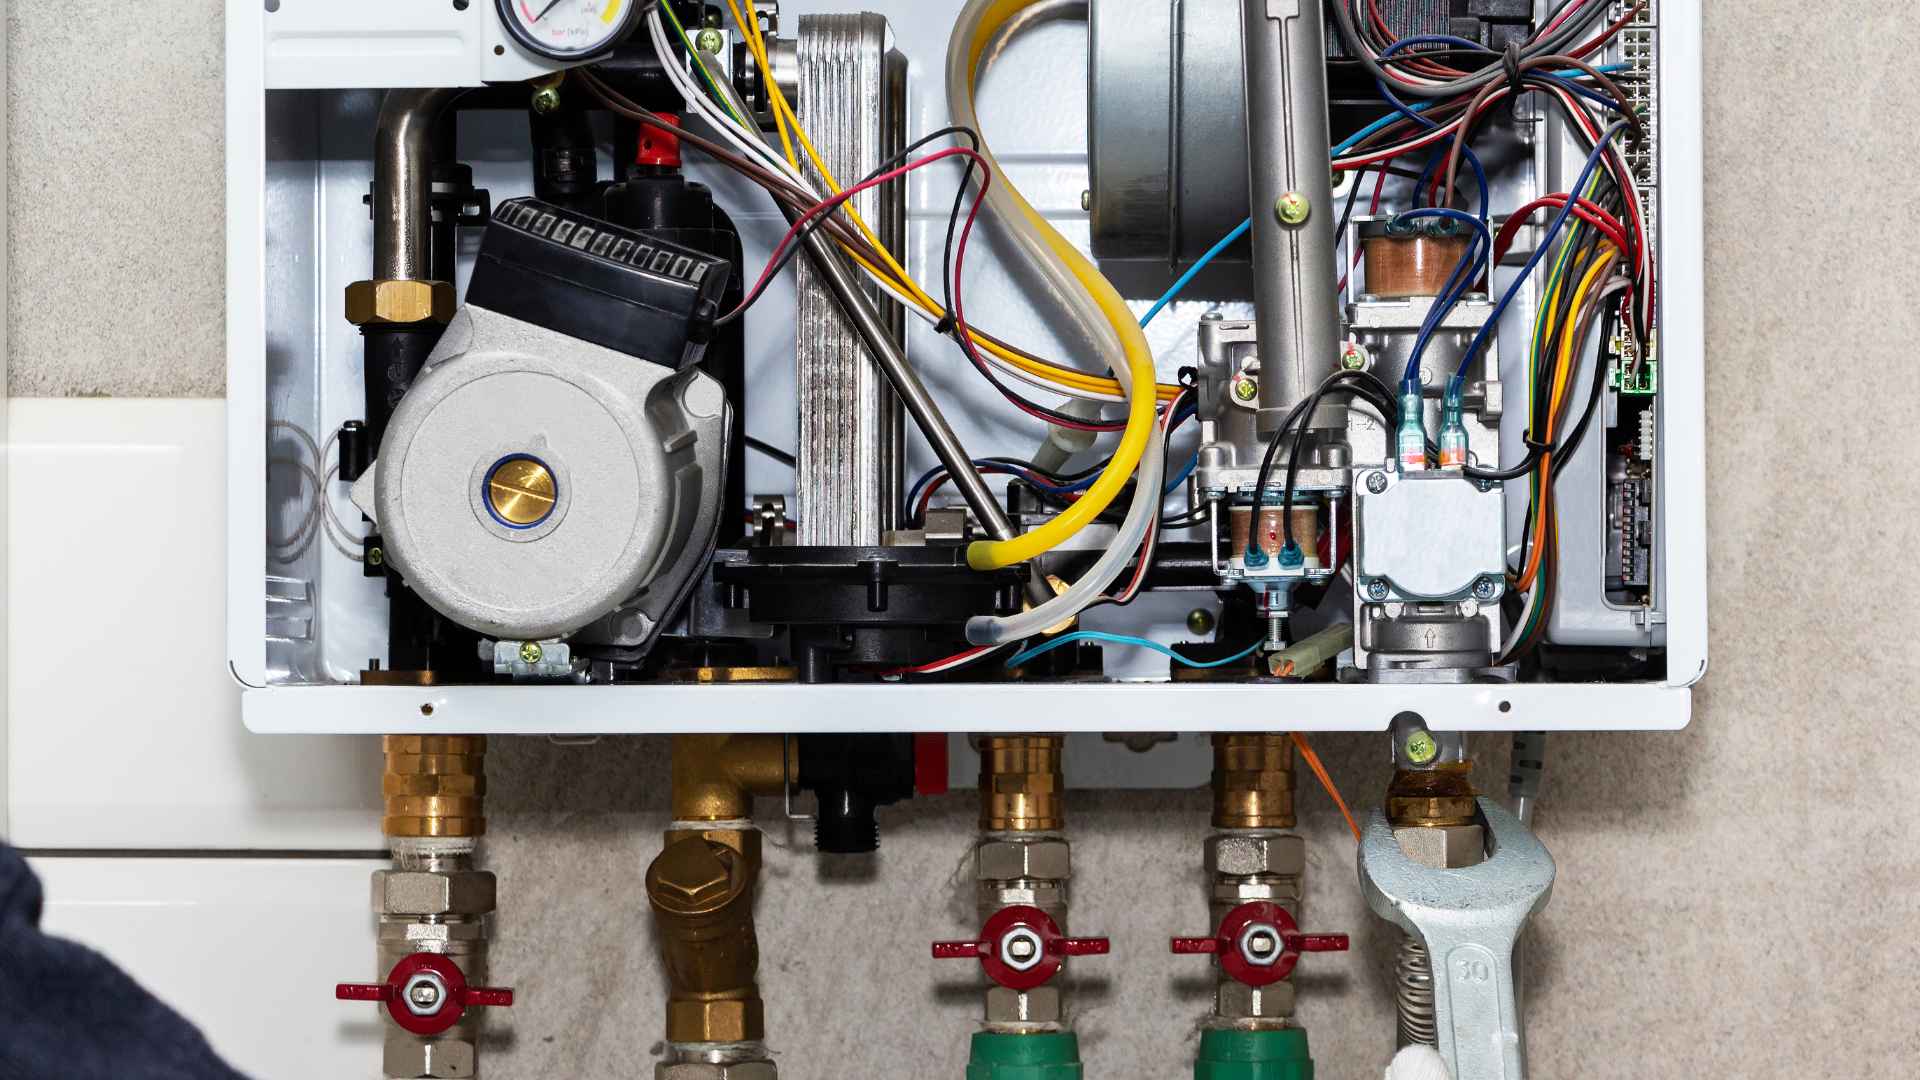 Interior of a modern boiler with visible intricate wiring and components, including pipes, valves, and gas lines.